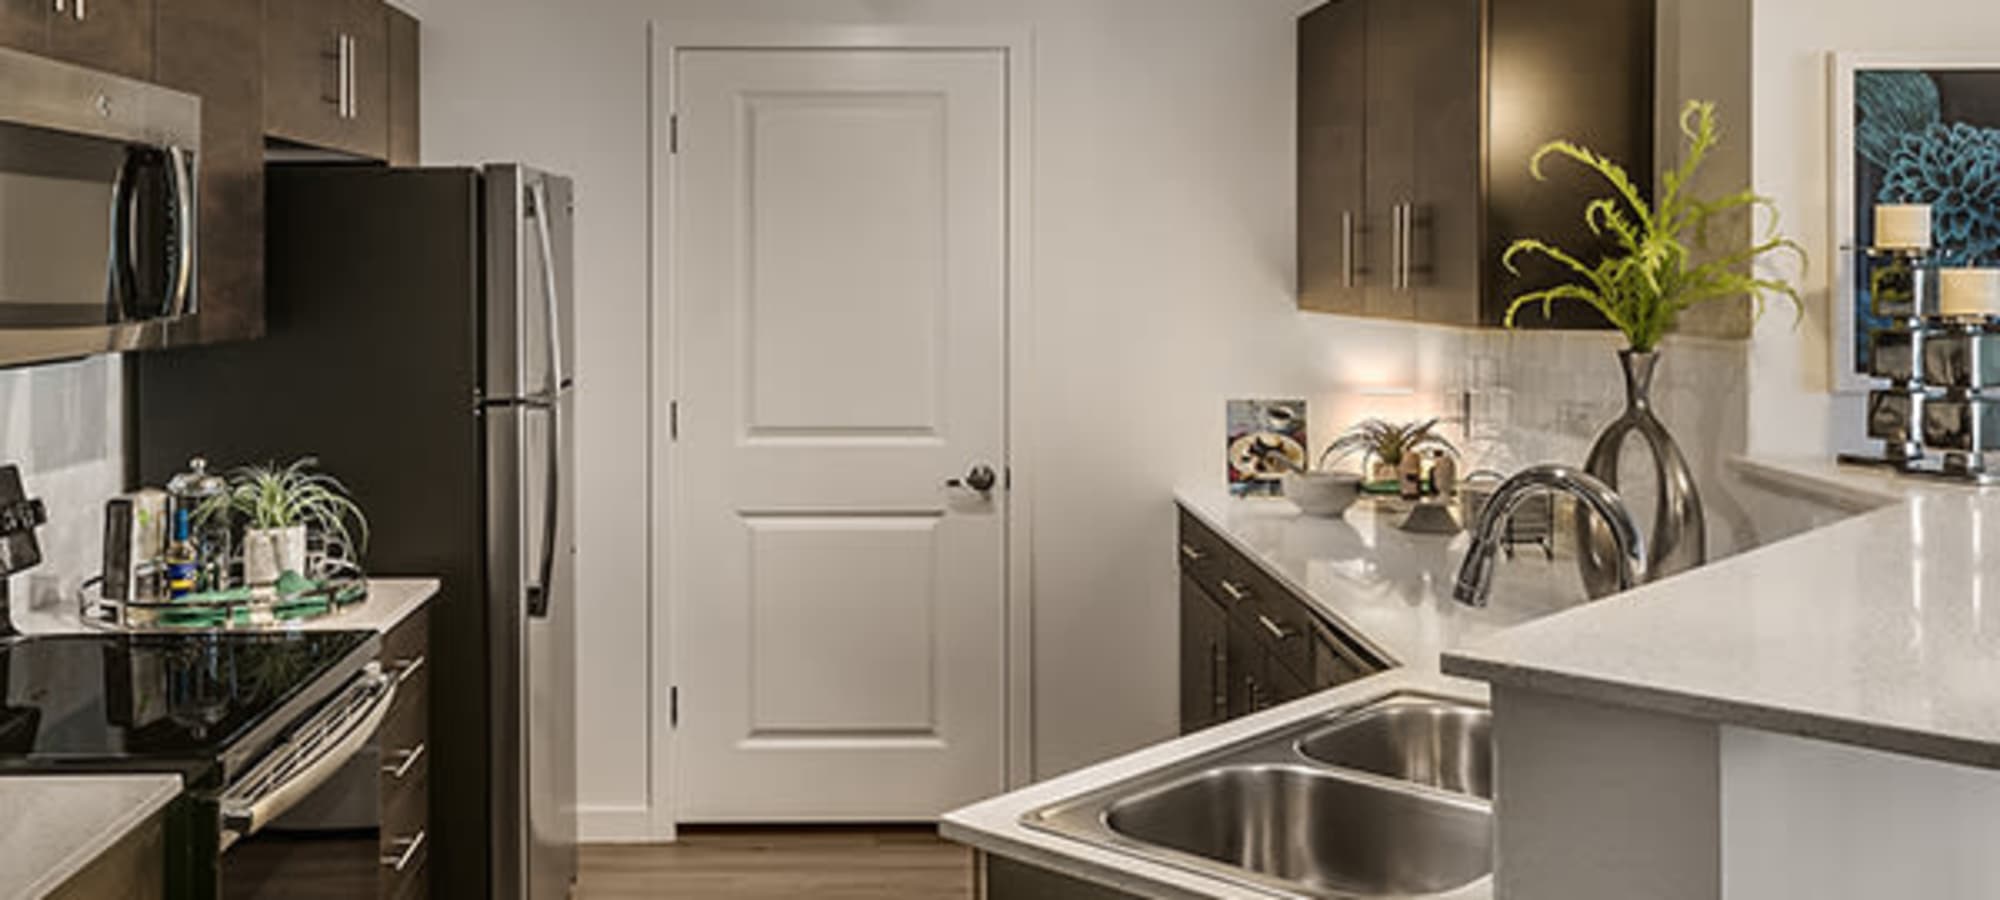 Kitchen at Park Place at Fountain Hills | Apartments in Fountain Hills, Arizona